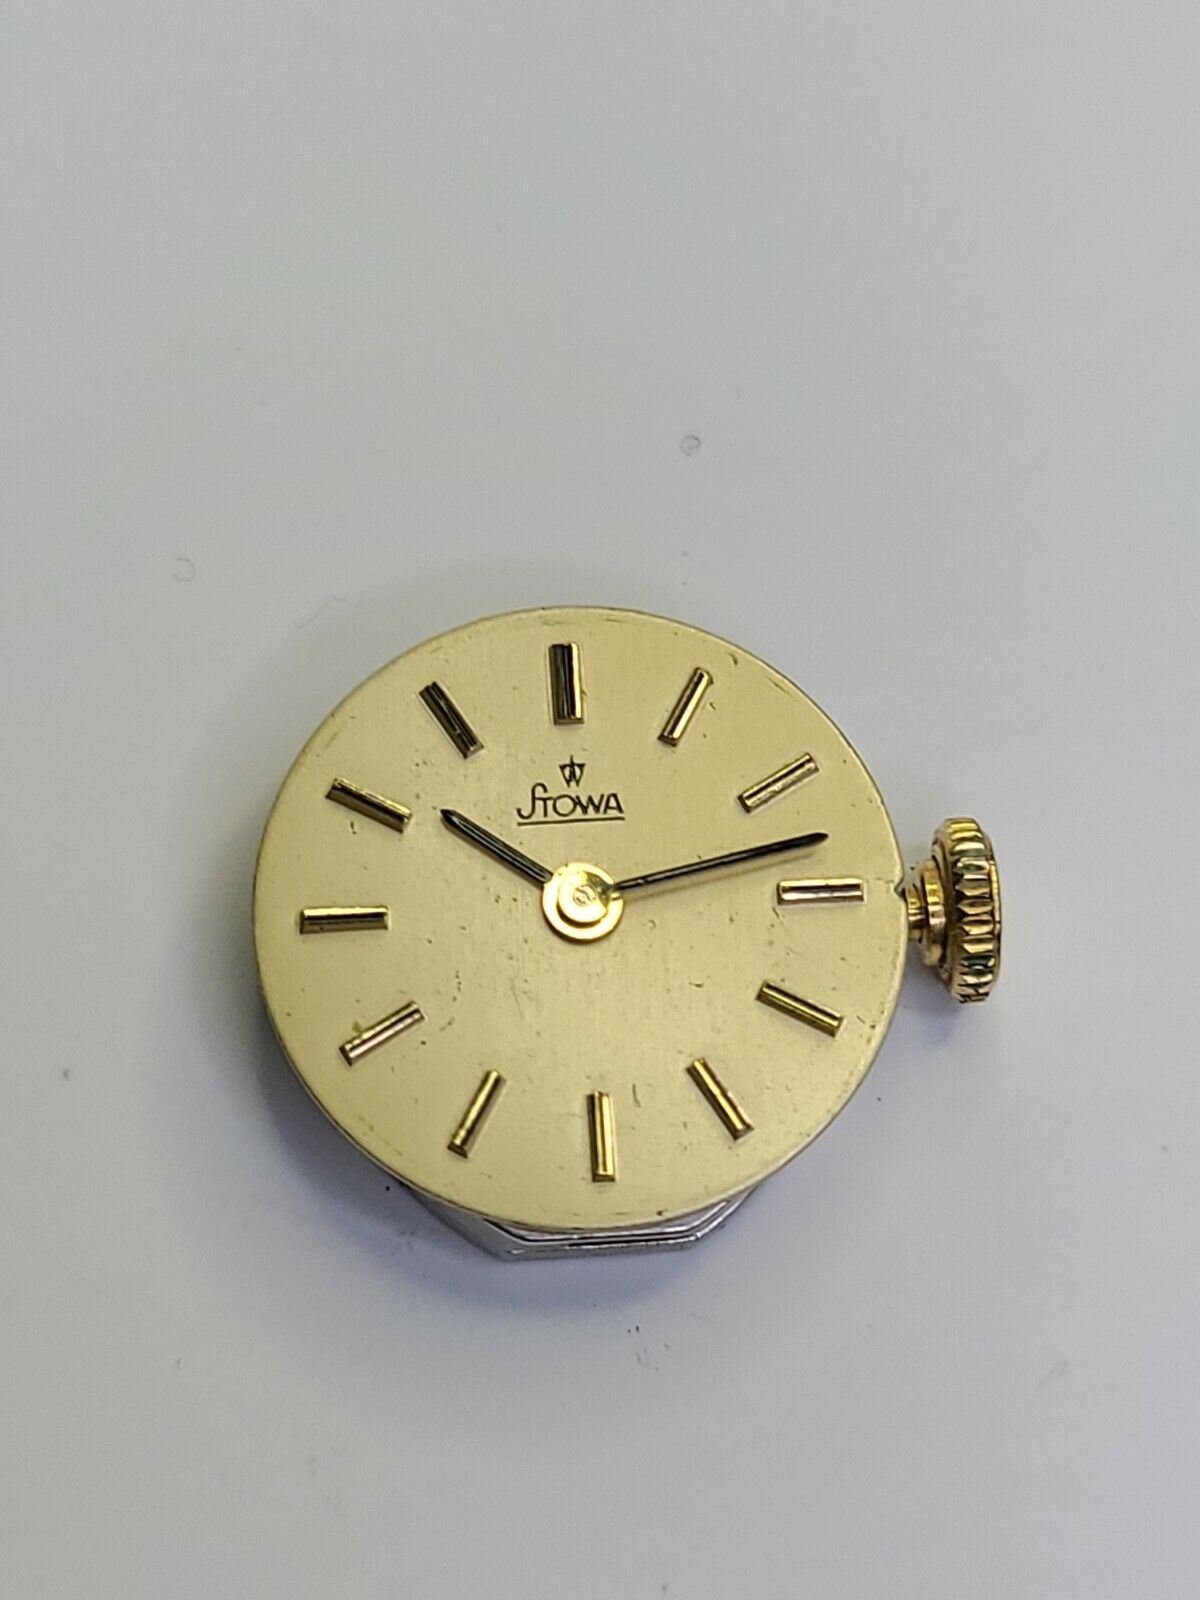 Stowa INT Caliber 1980 Watch Movement 17 Jewels with dial and hands